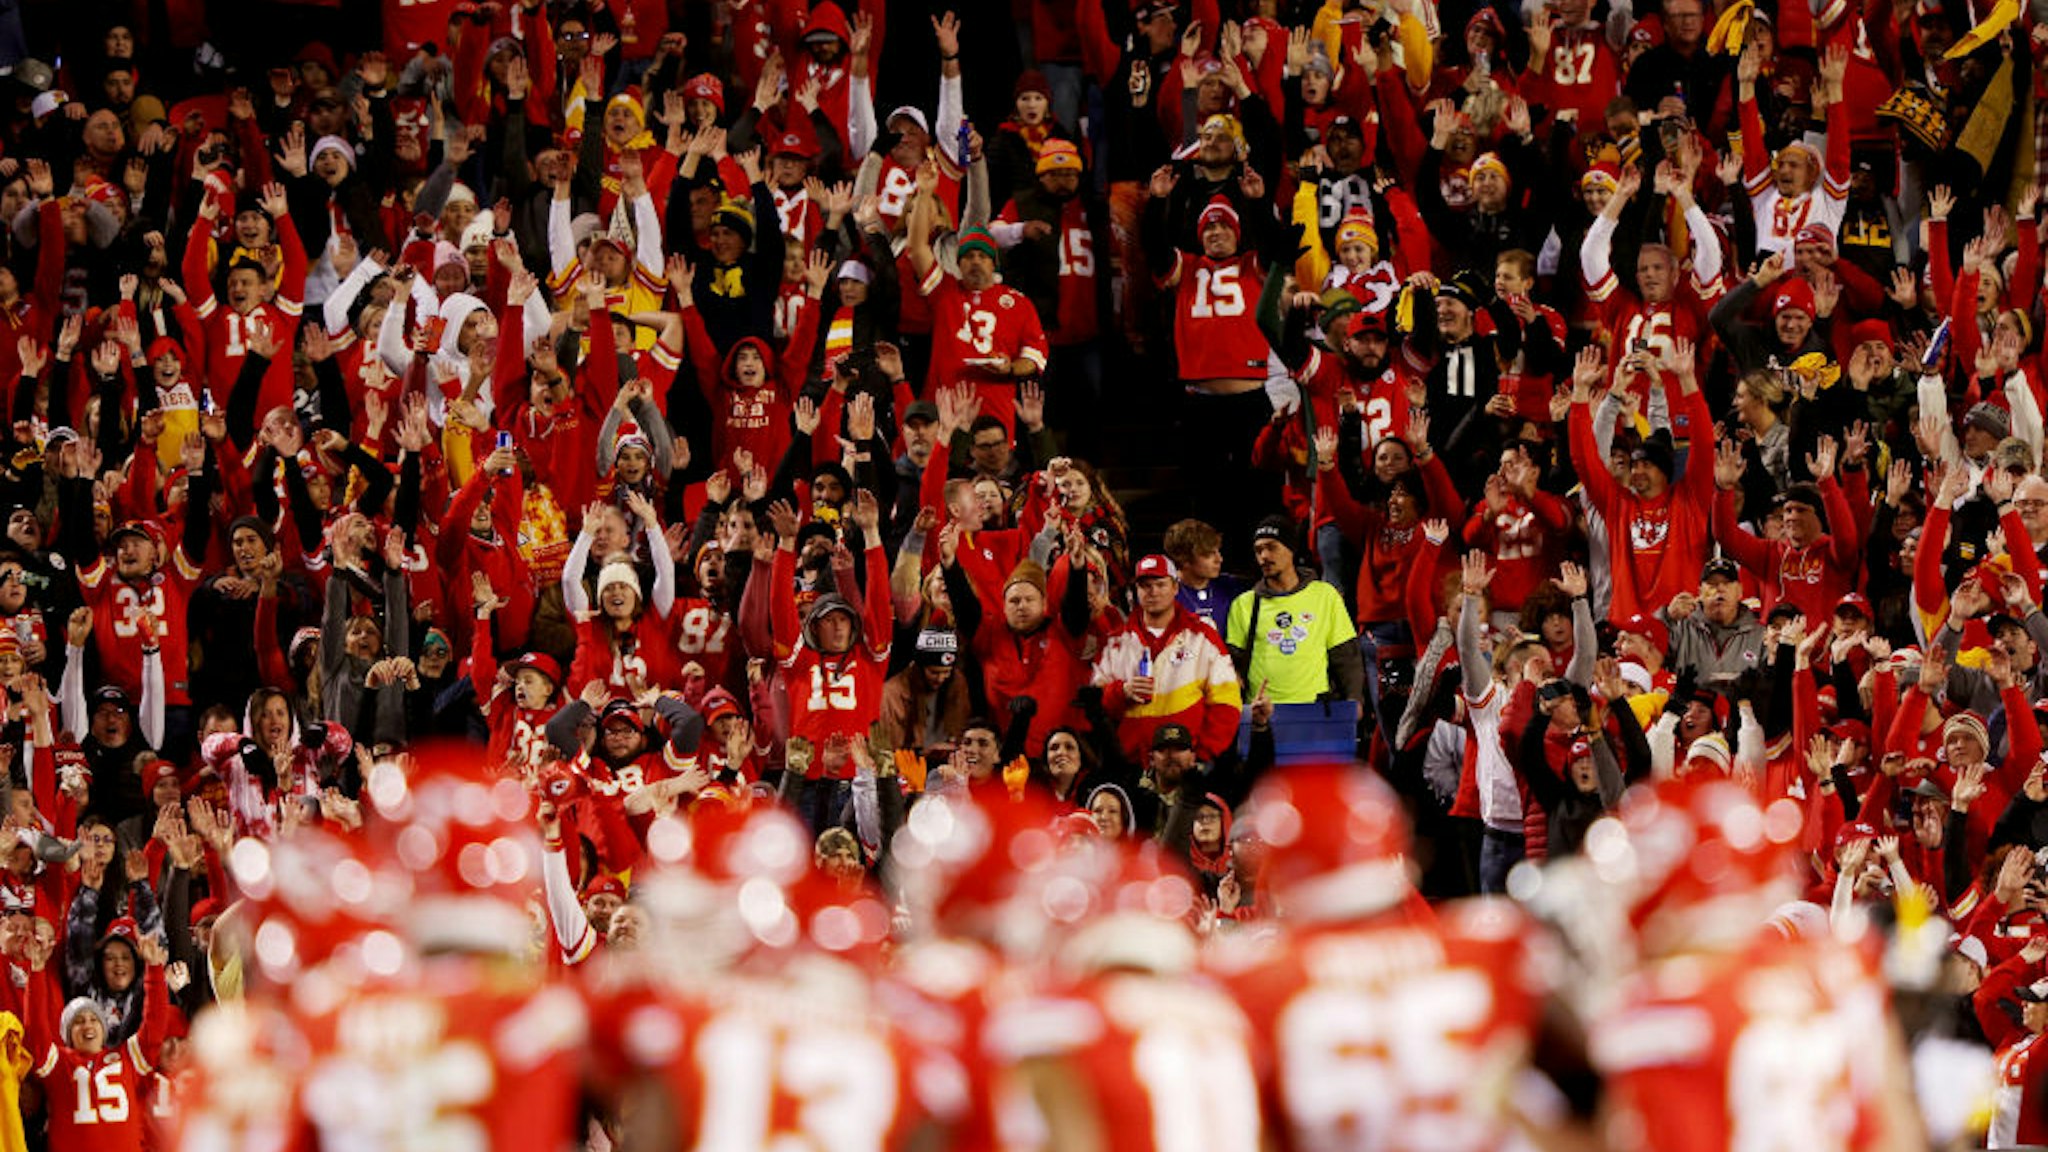 KANSAS CITY, MISSOURI - DECEMBER 26: Kansas City Chiefs fans do the wave during the third quarter in the game against the Pittsburgh Steelers at Arrowhead Stadium on December 26, 2021 in Kansas City, Missouri. (Photo by Jamie Squire/Getty Images)